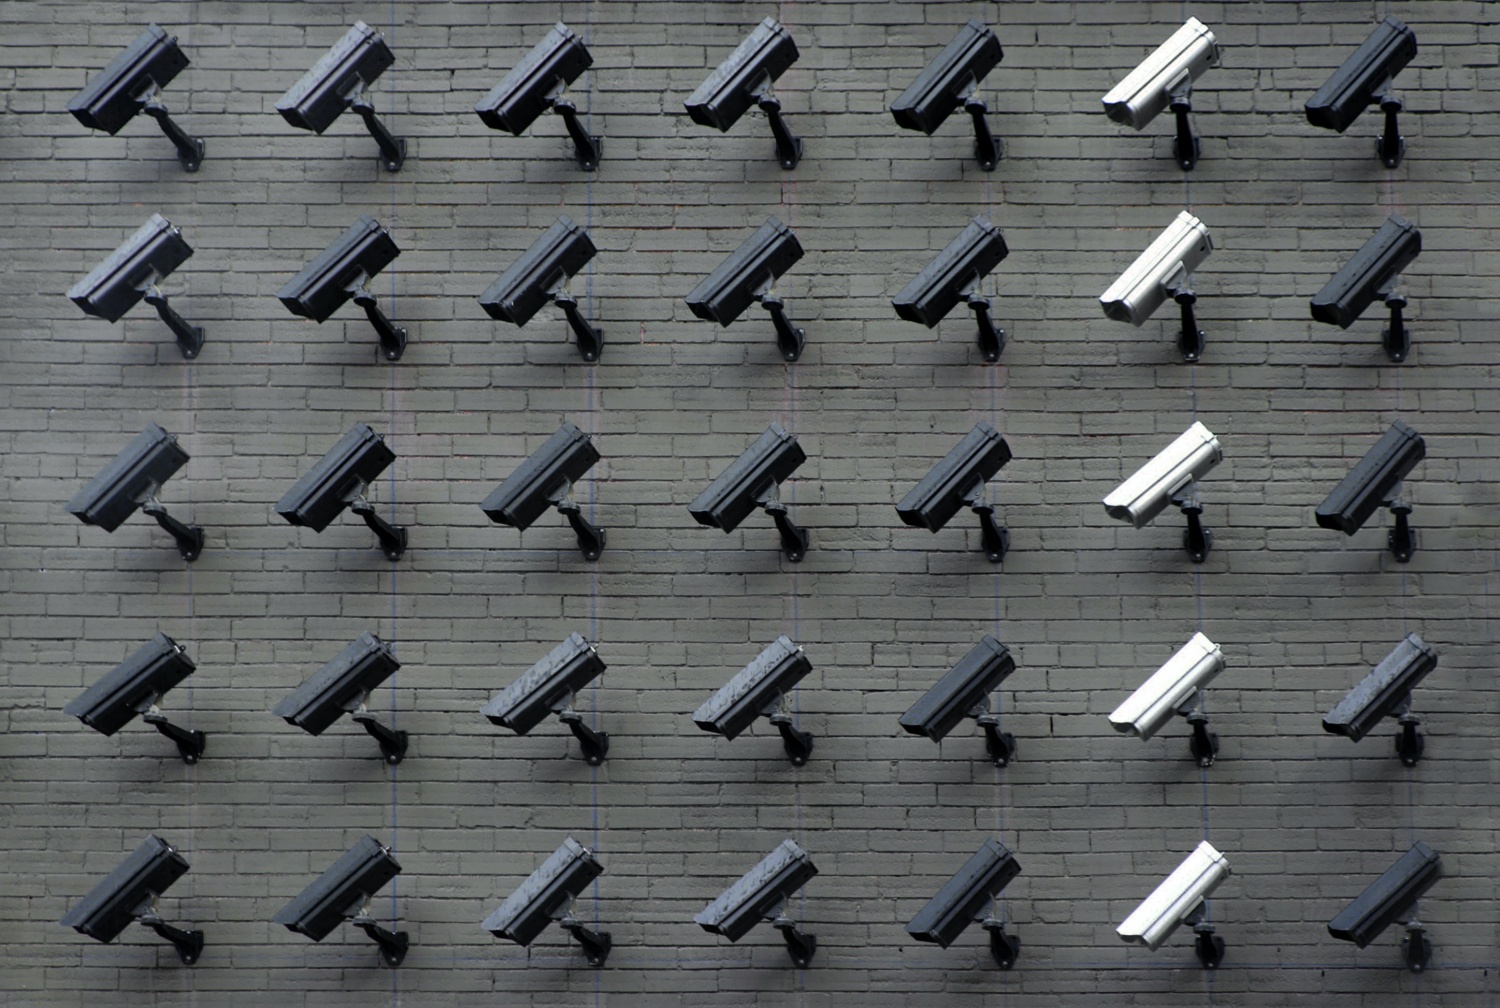 Where is it Legal to Install Surveillance Cameras? Here's Top 5 Amazon Security Cameras 